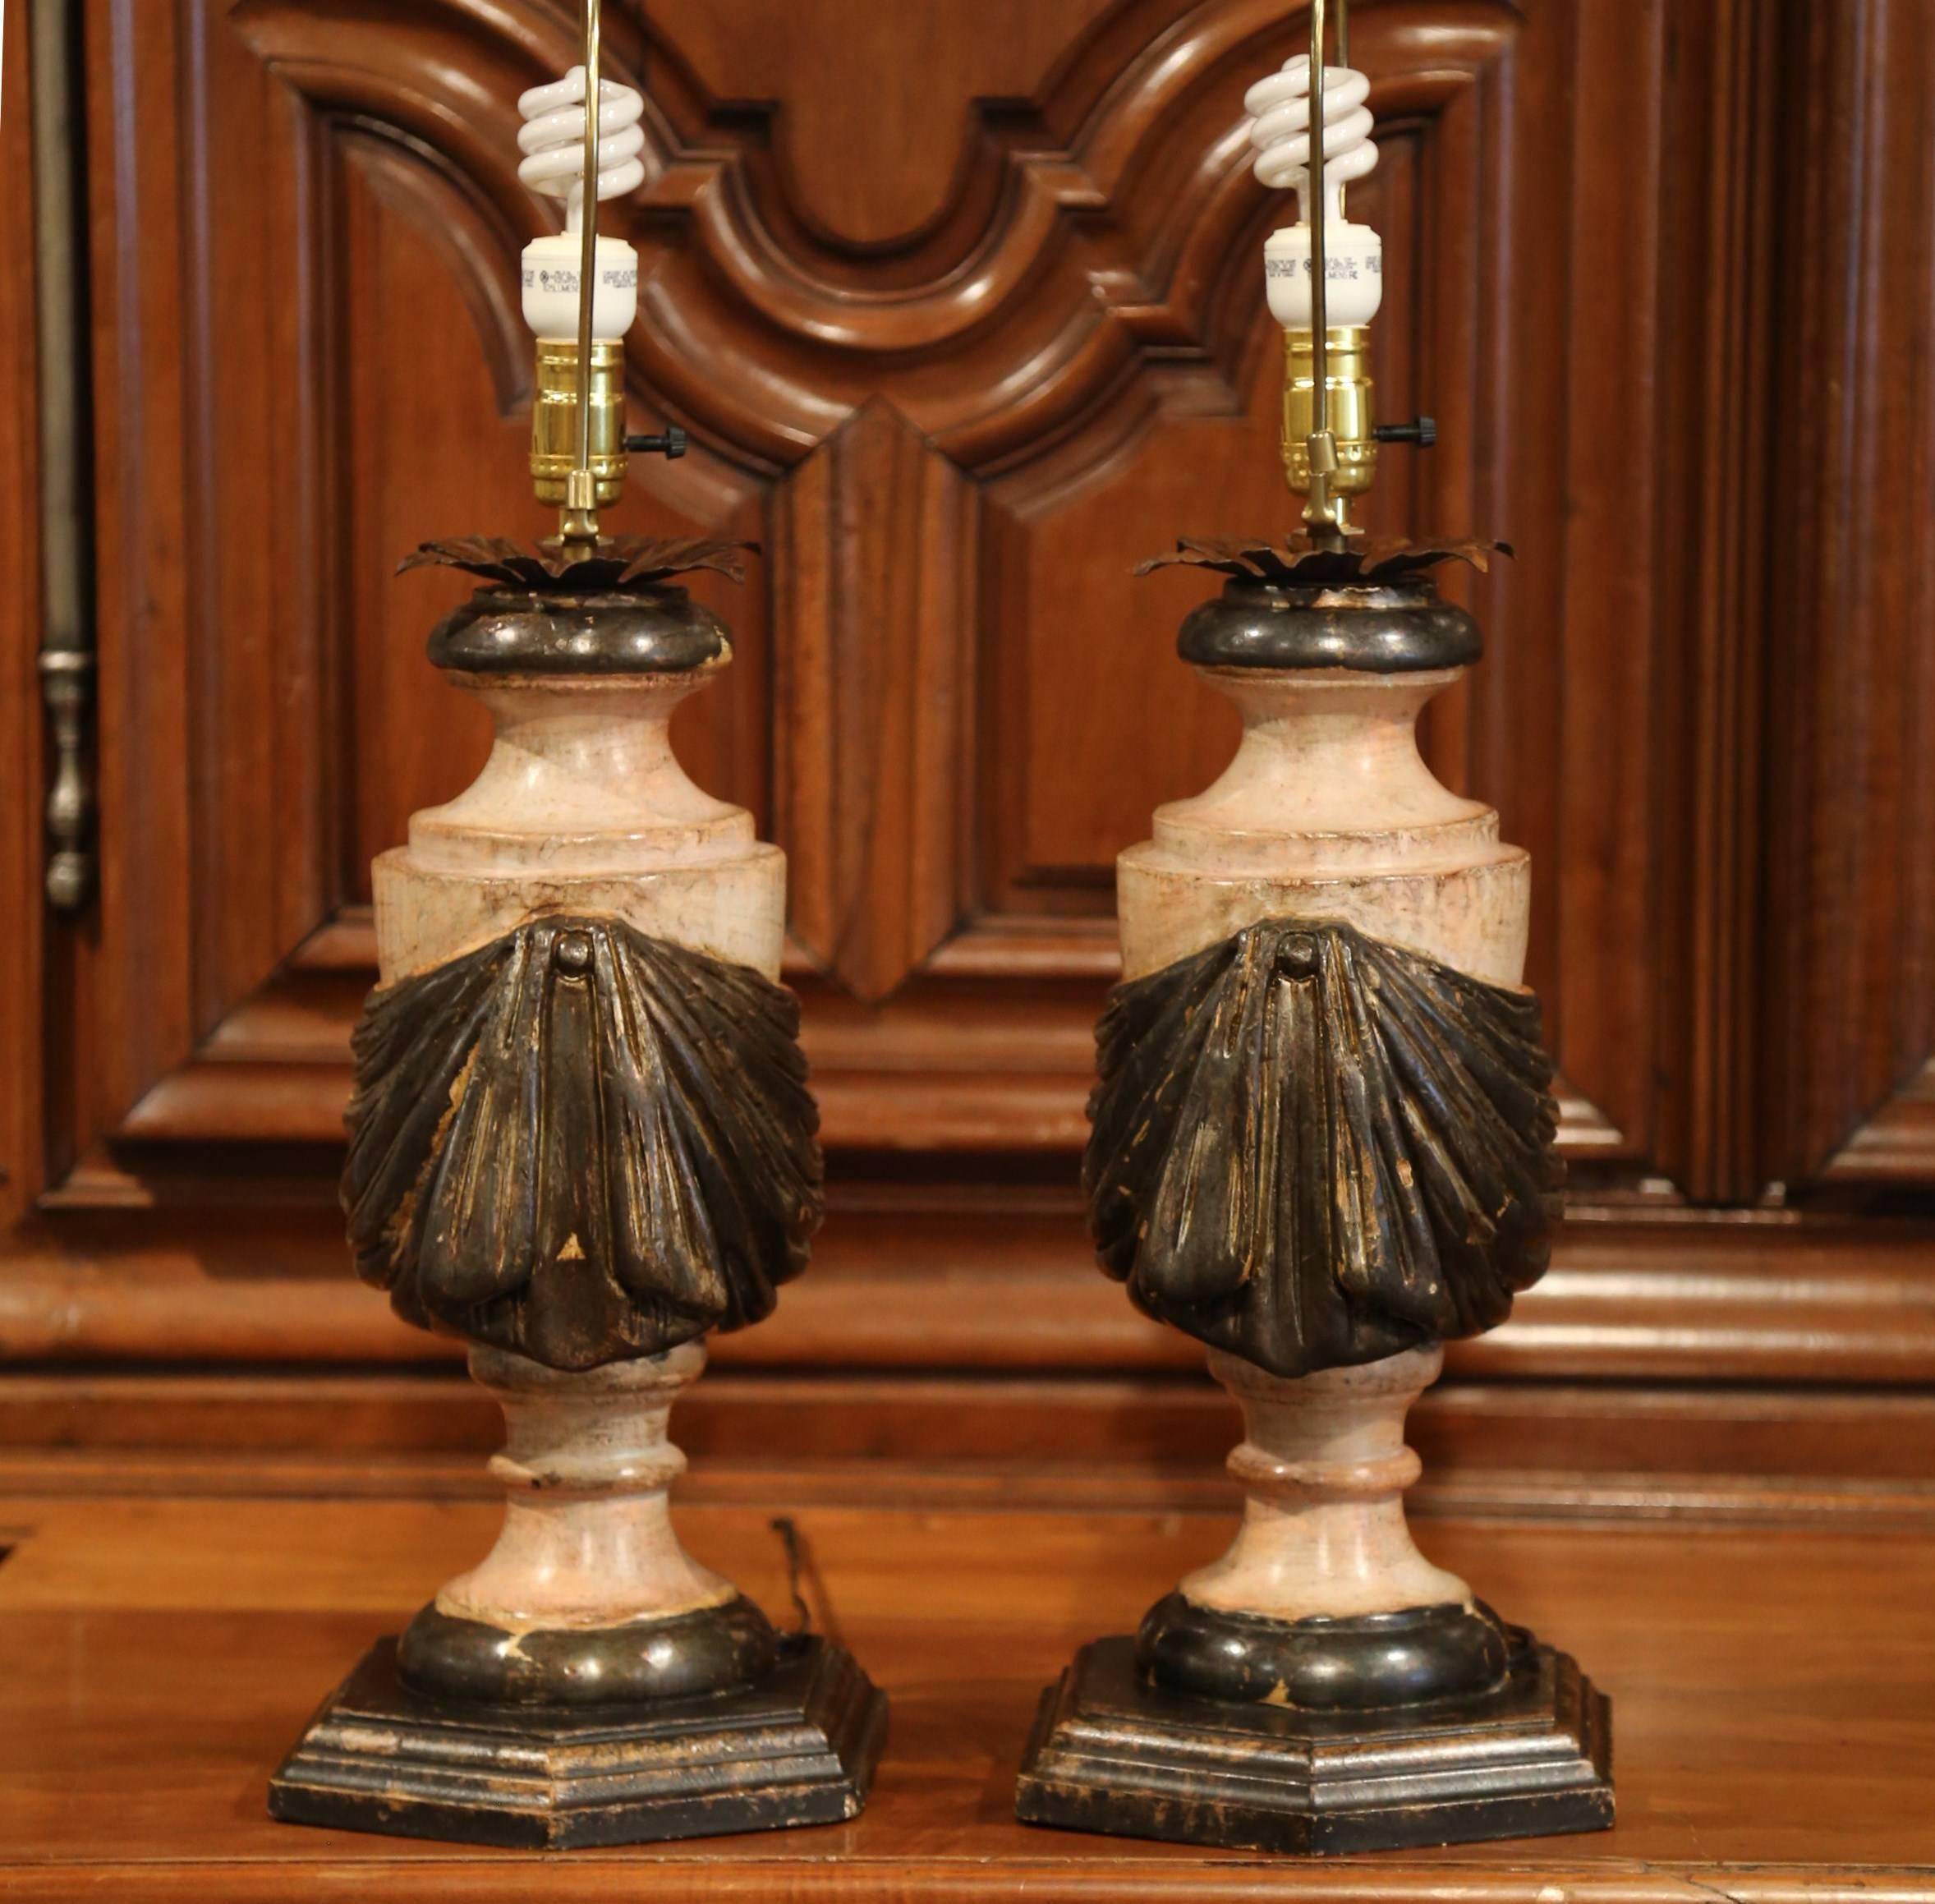 Wood Pair of Italian Carved Lamp Bases with Polychrome Antique Painted Finish